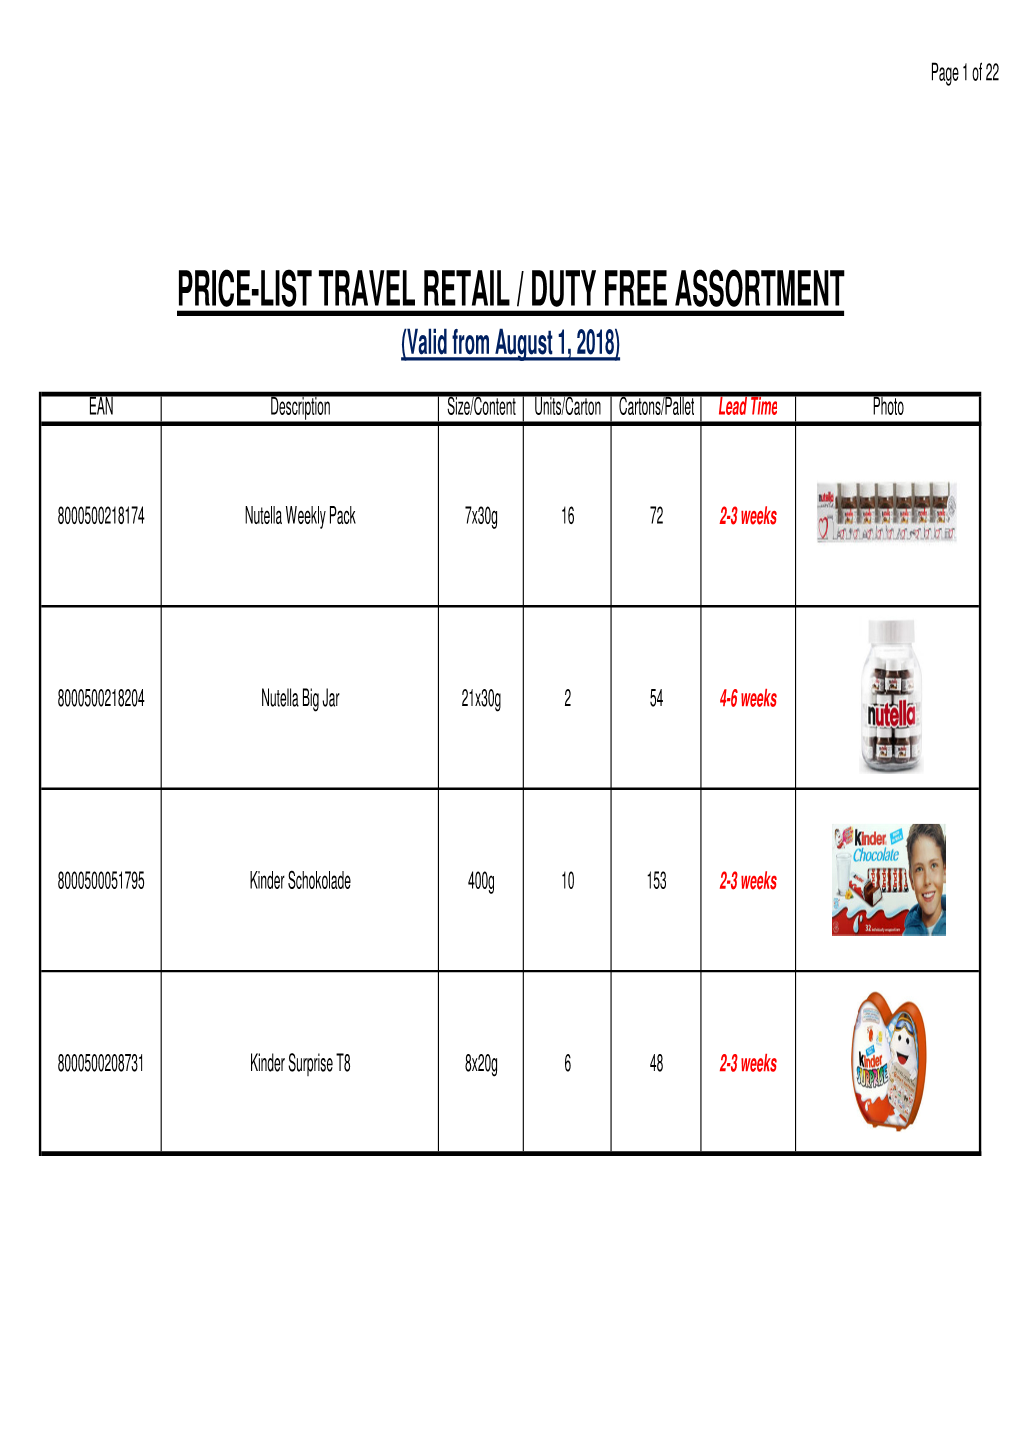 PRICE-LIST TRAVEL RETAIL / DUTY FREE ASSORTMENT (Valid from August 1, 2018)